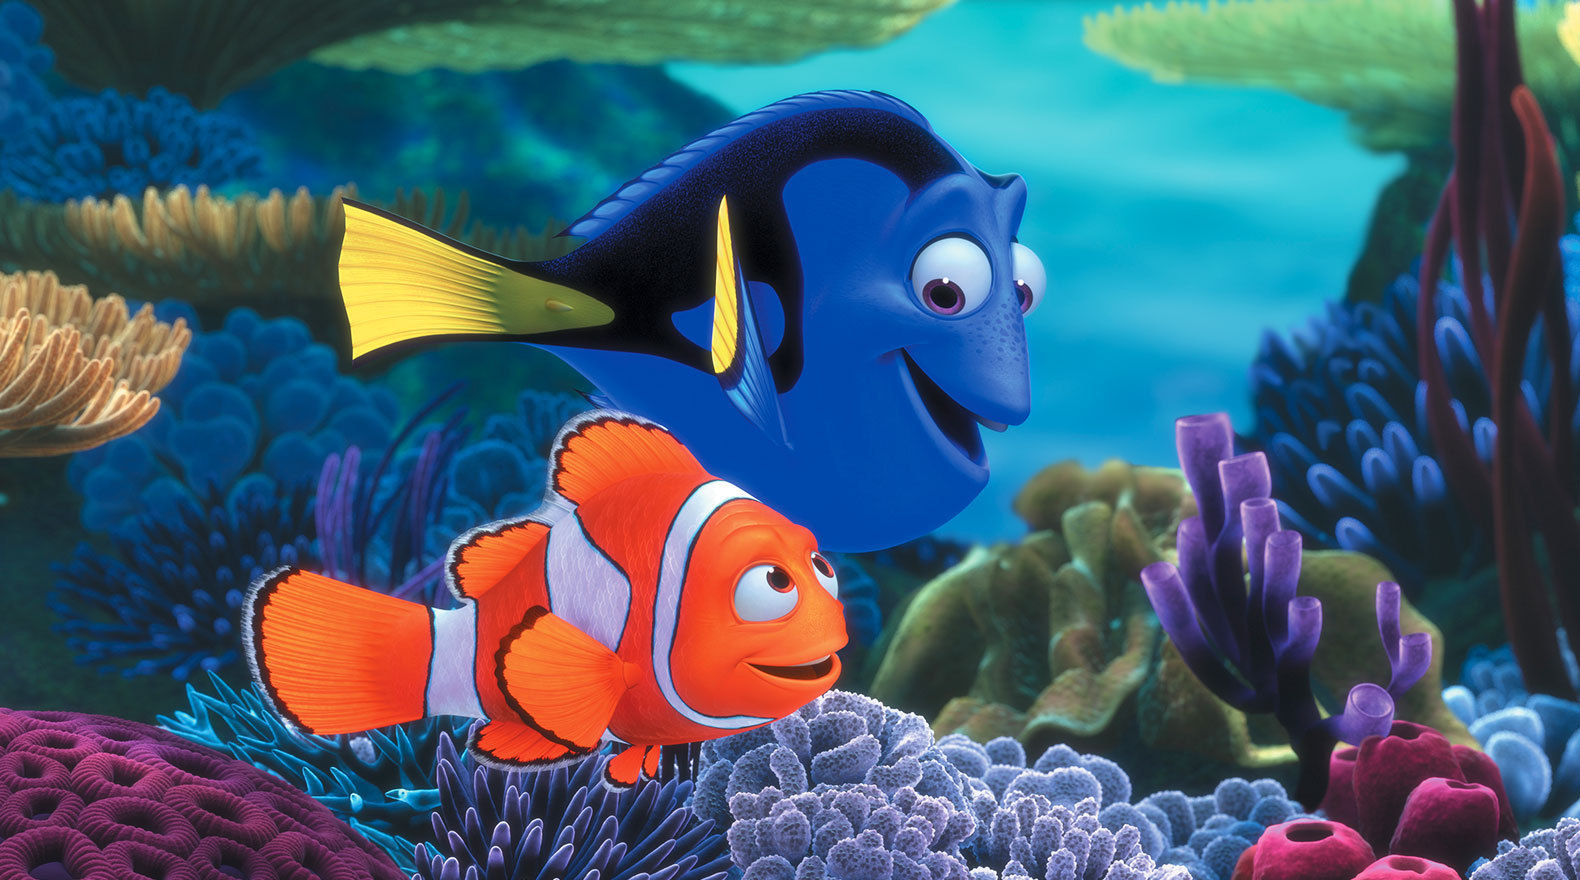 Buy research papers online cheap stereotyping in finding nemo